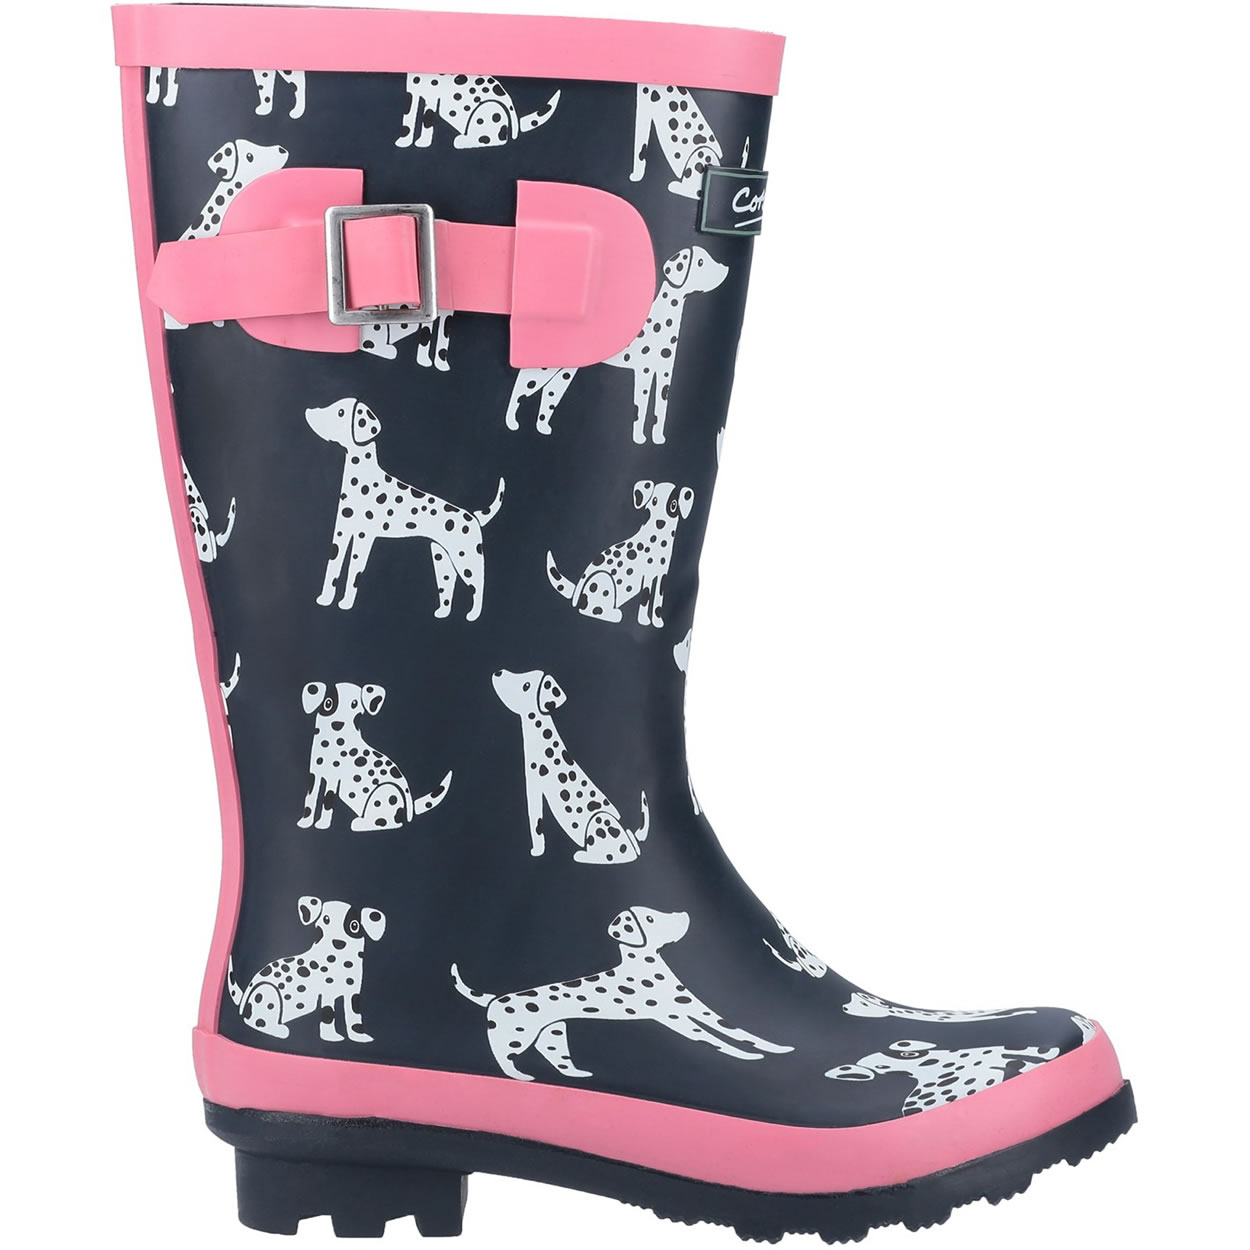 Cotswold Kids Wellington Boots in Dalmatian Navy/Pink Print - £34.99 ...